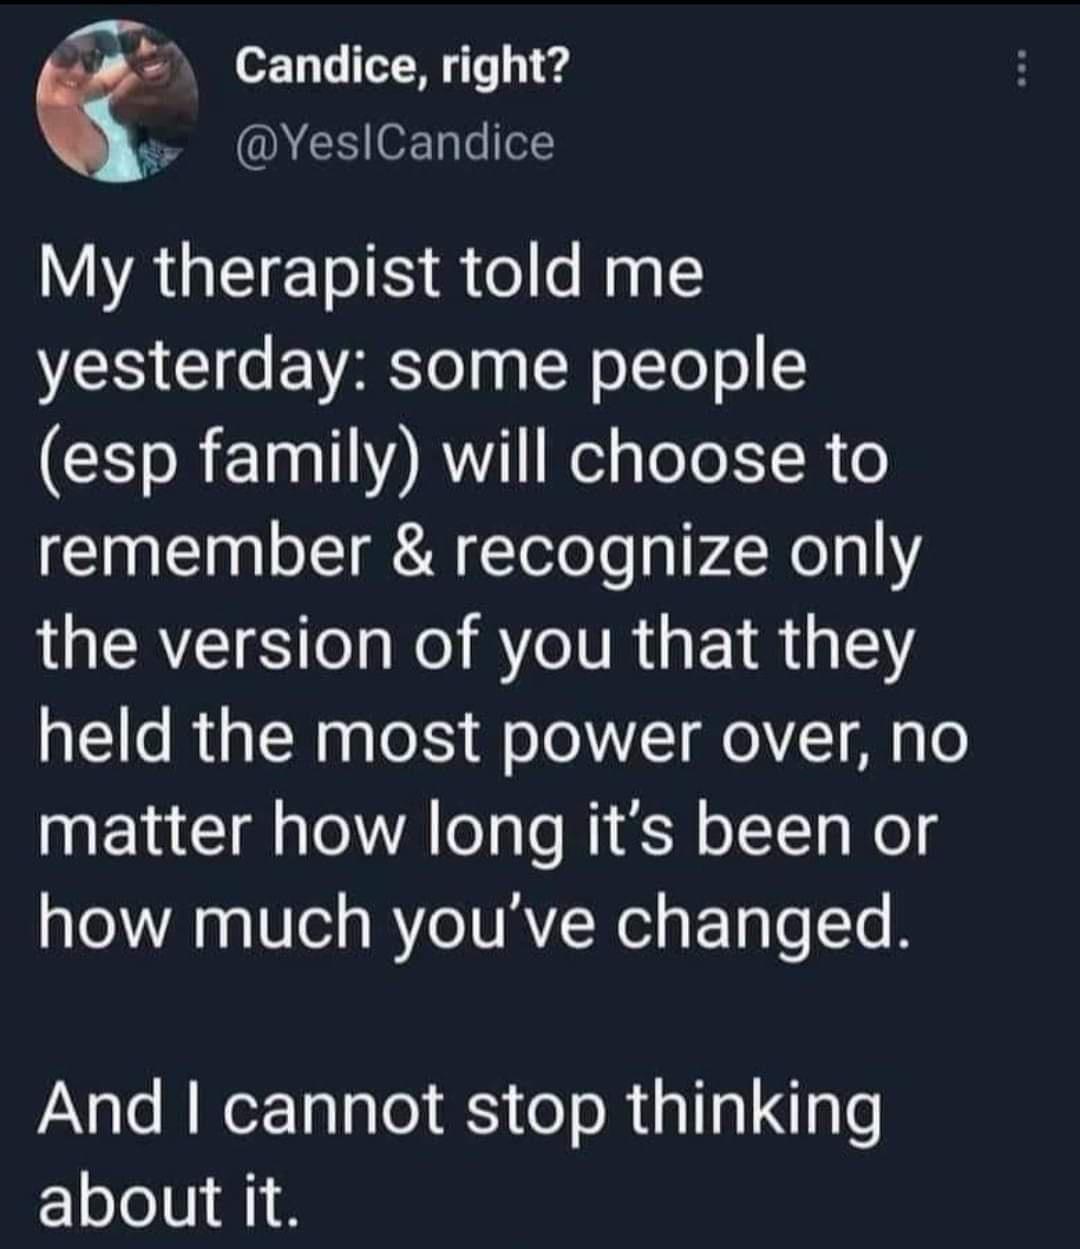 funny memes - atmosphere - Candice, right? |Candice My therapist told me yesterday some people esp family will choose to remember & recognize only the version of you that they held the most power over, no matter how long it's been or how much you've chang